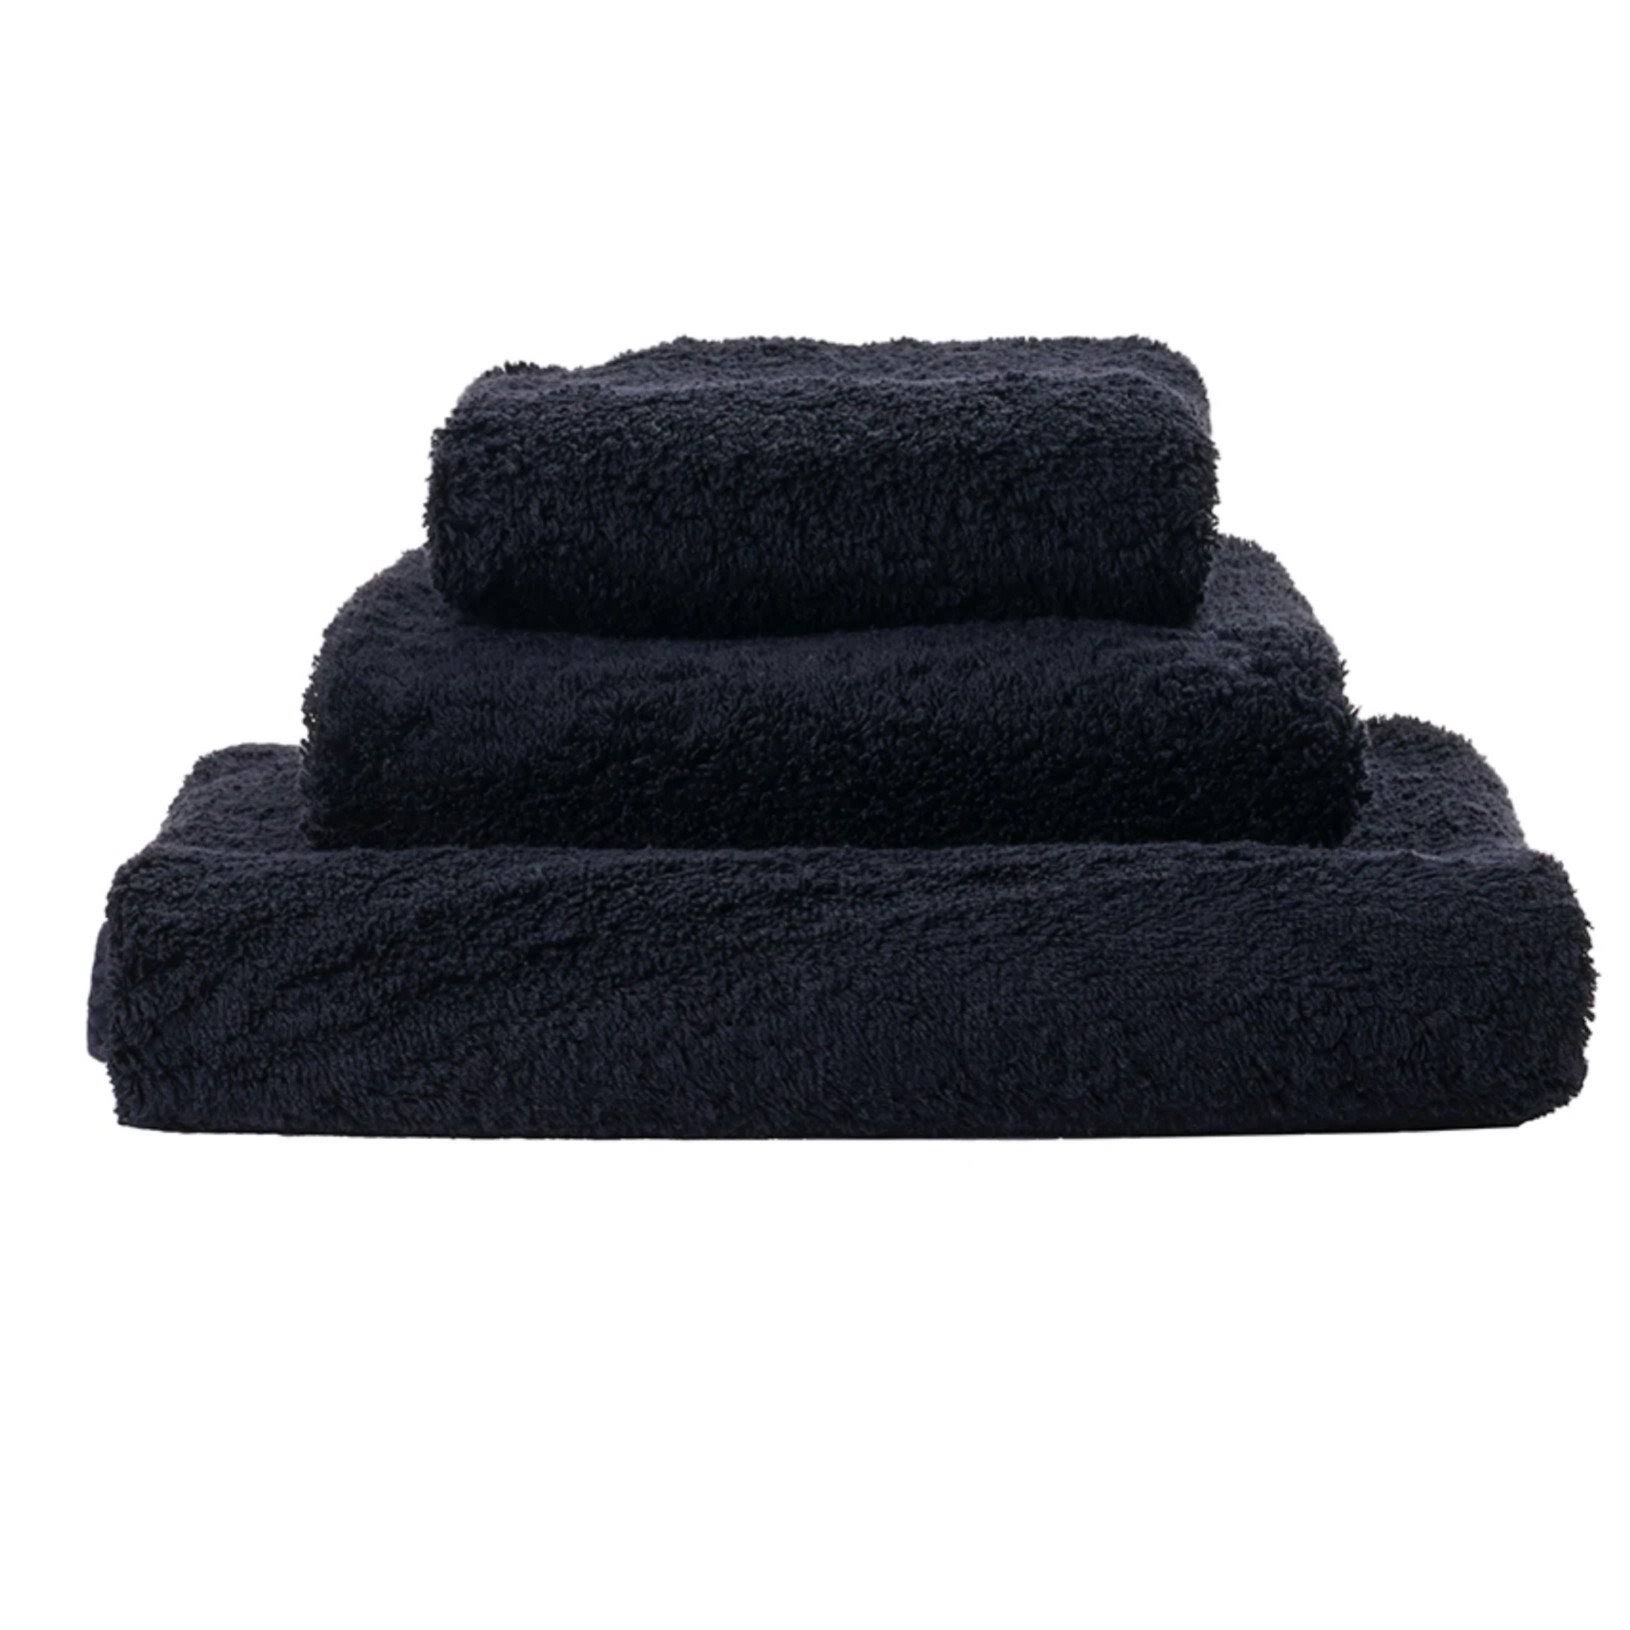 Abyss Super Pile Towels - Hand Towel 17x30" Black 990